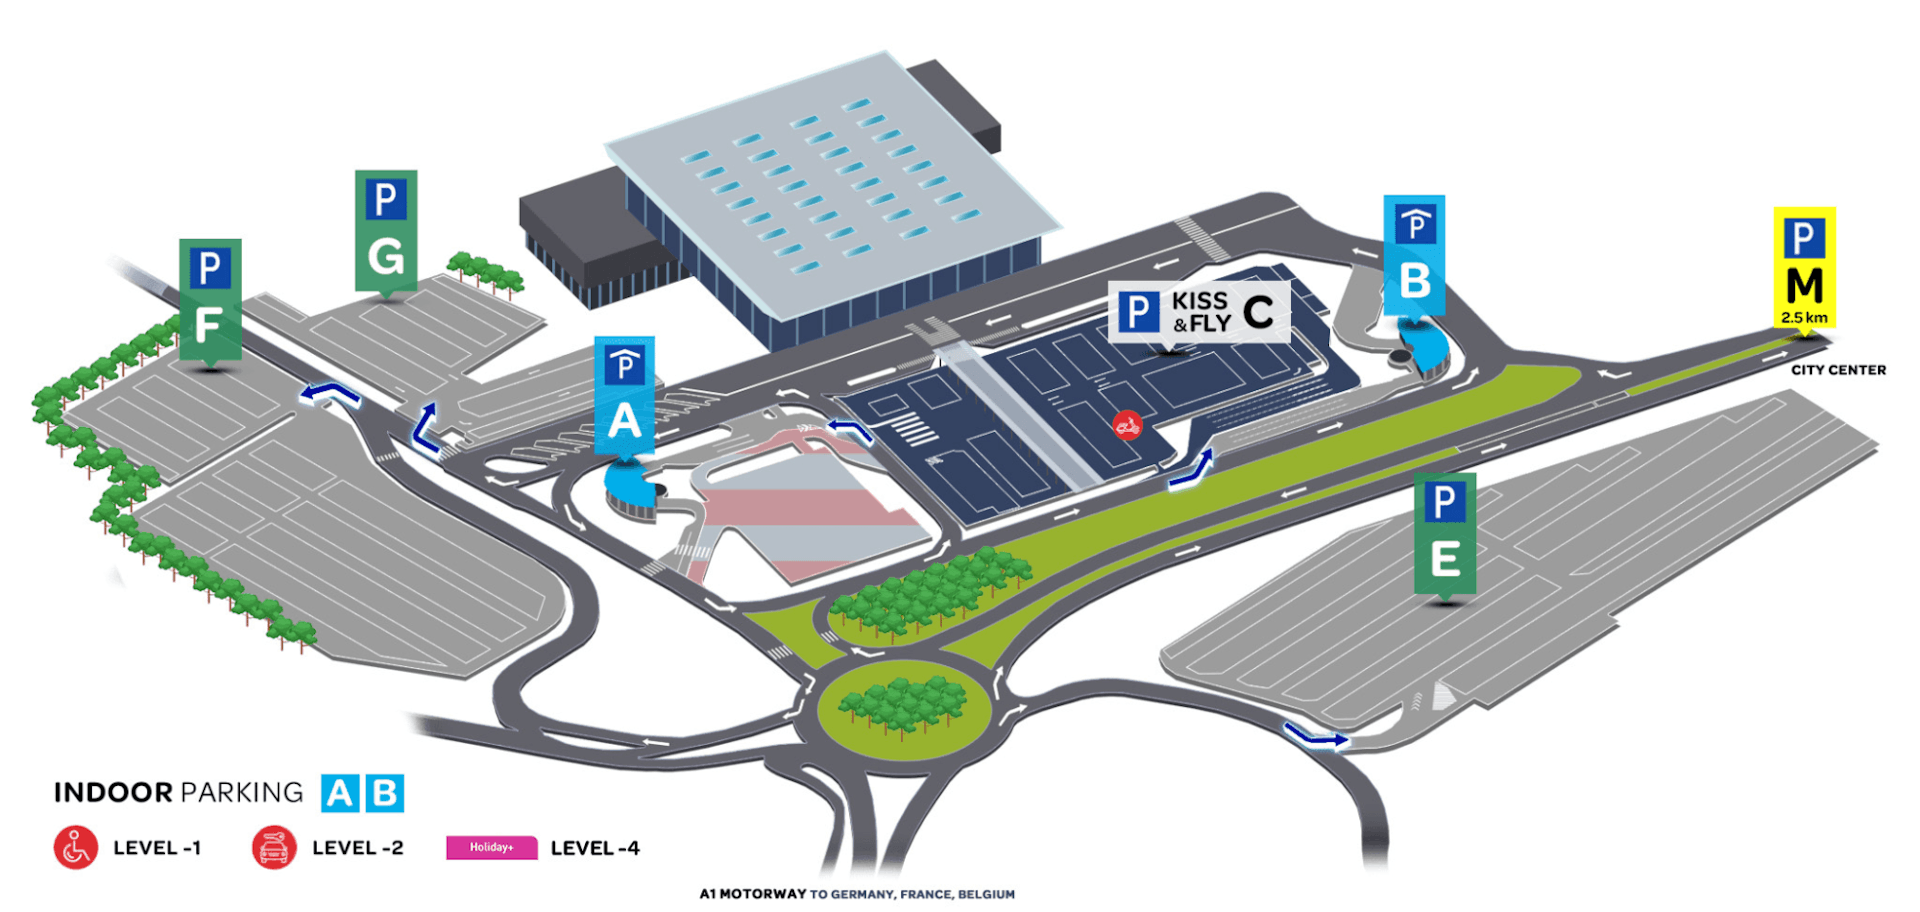 Photo from the official site of Luxembourg Airport Parking